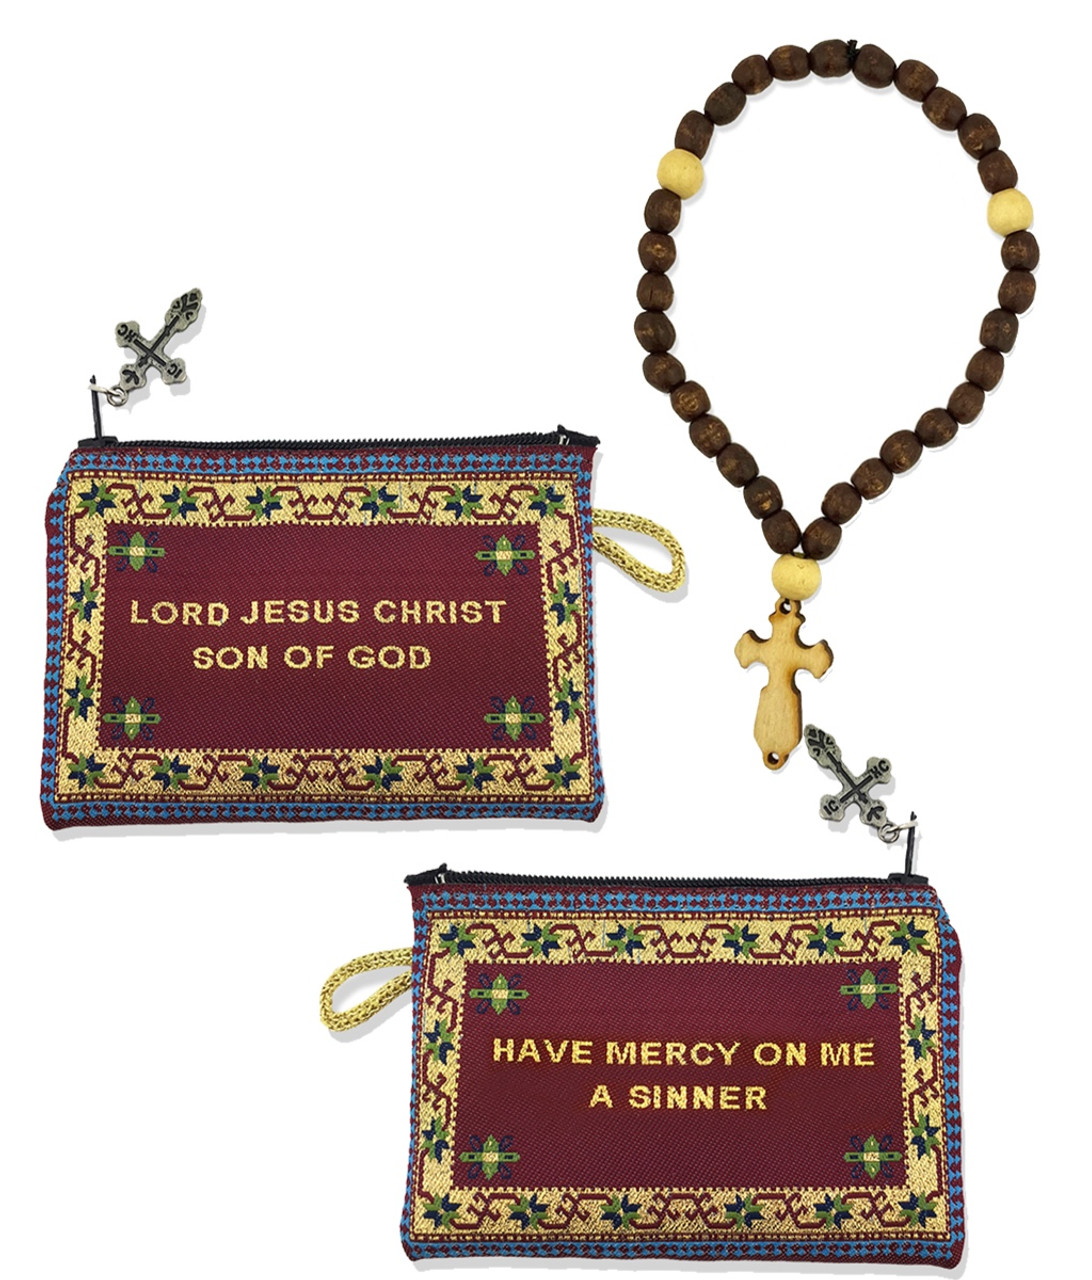 https://cdn11.bigcommerce.com/s-p1cqiyfg/images/stencil/1280x1280/products/3758/8958/003631-tapestry-pouch-prayer-rope-jesus-prayer__27841.1695399128.jpg?c=2